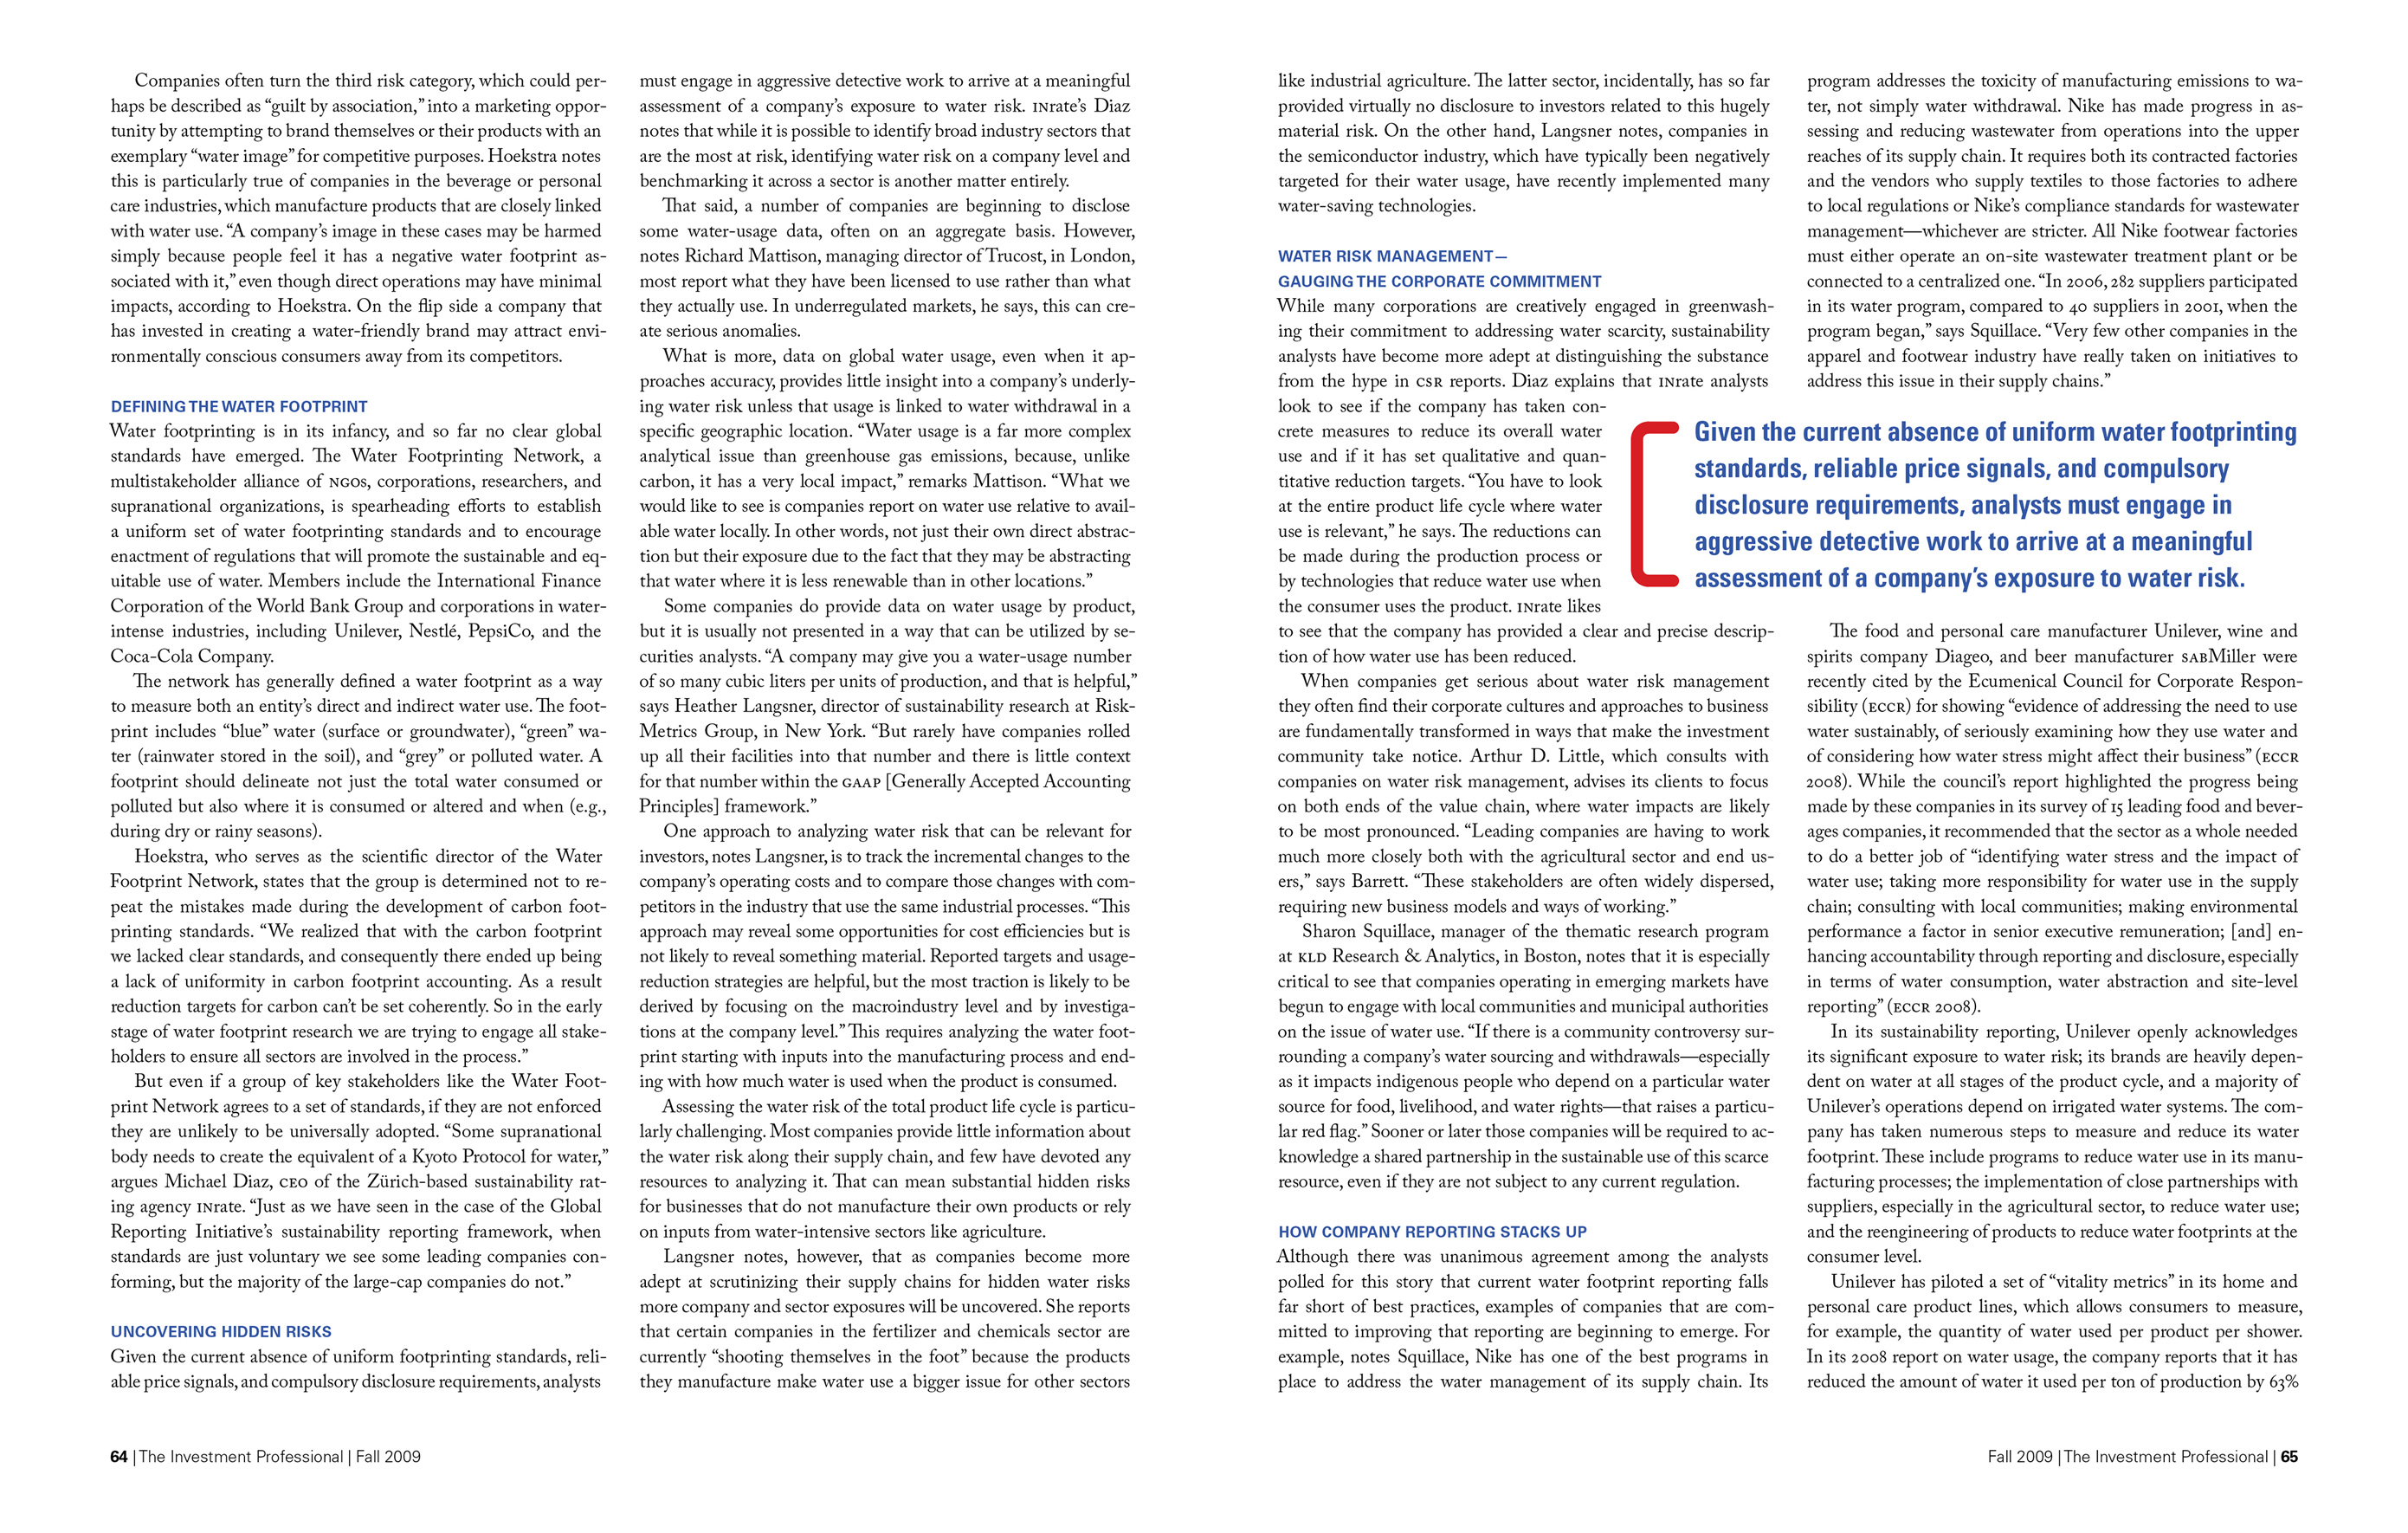 Second spread of the article titled 'A Watershed Moment.' A pull quote in blue and red addresses the assessment of exposure to water risk.